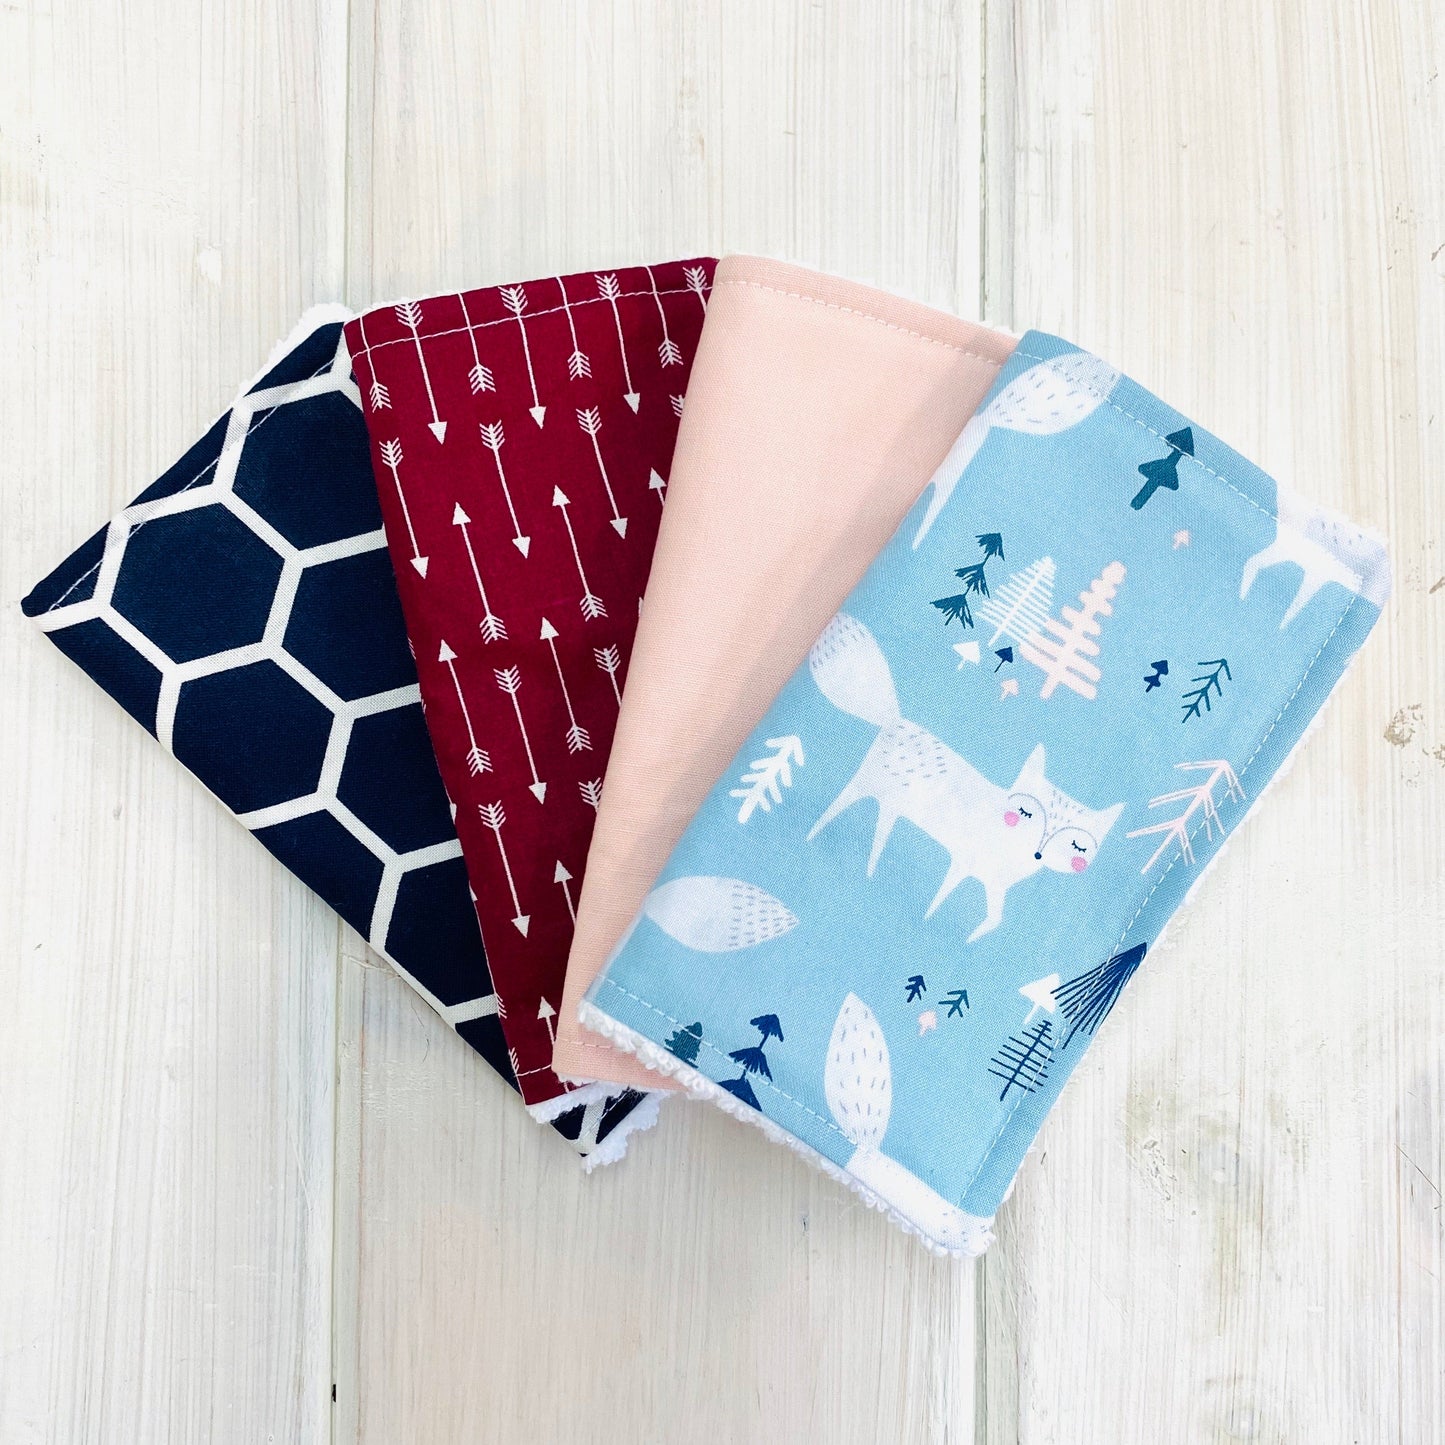 4 handmade washing cloths, sustainable reusable baby wipes in silver fox woodland print.